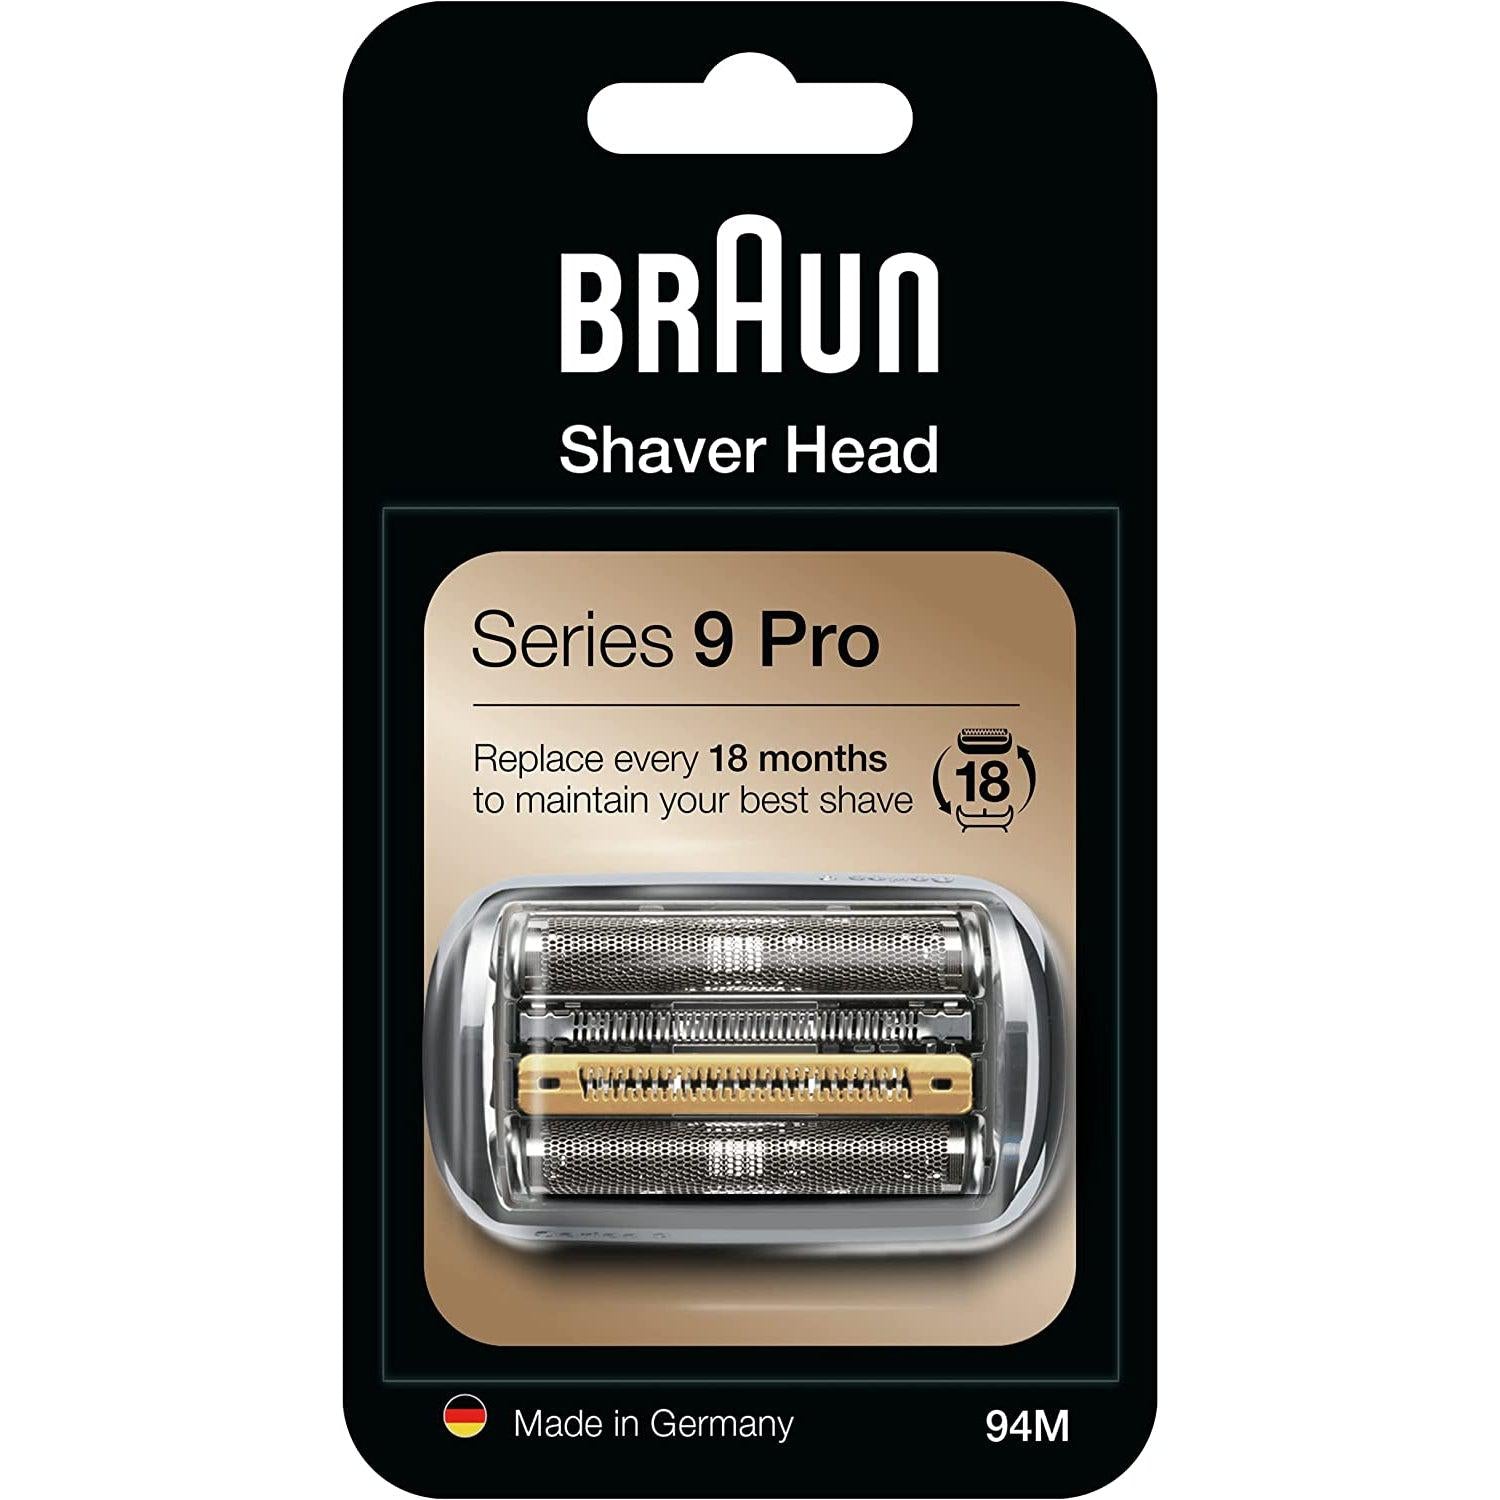 Braun CCR Clean & Renew Refill Cartridges - 100% Cleaner Compatible, 6